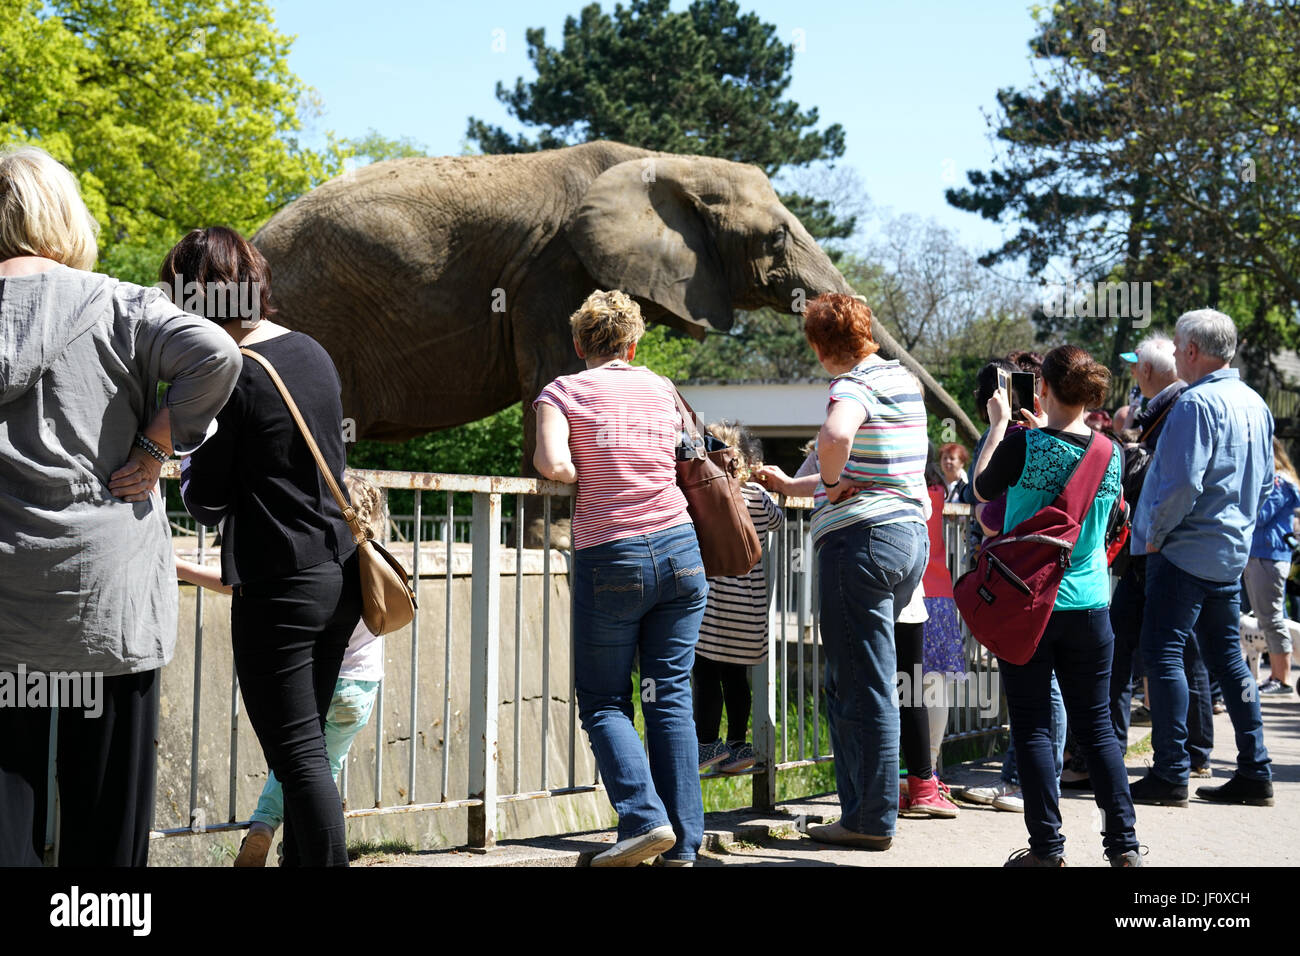 Visitors at the elephant in Magdeburg Zoo Stock Photo